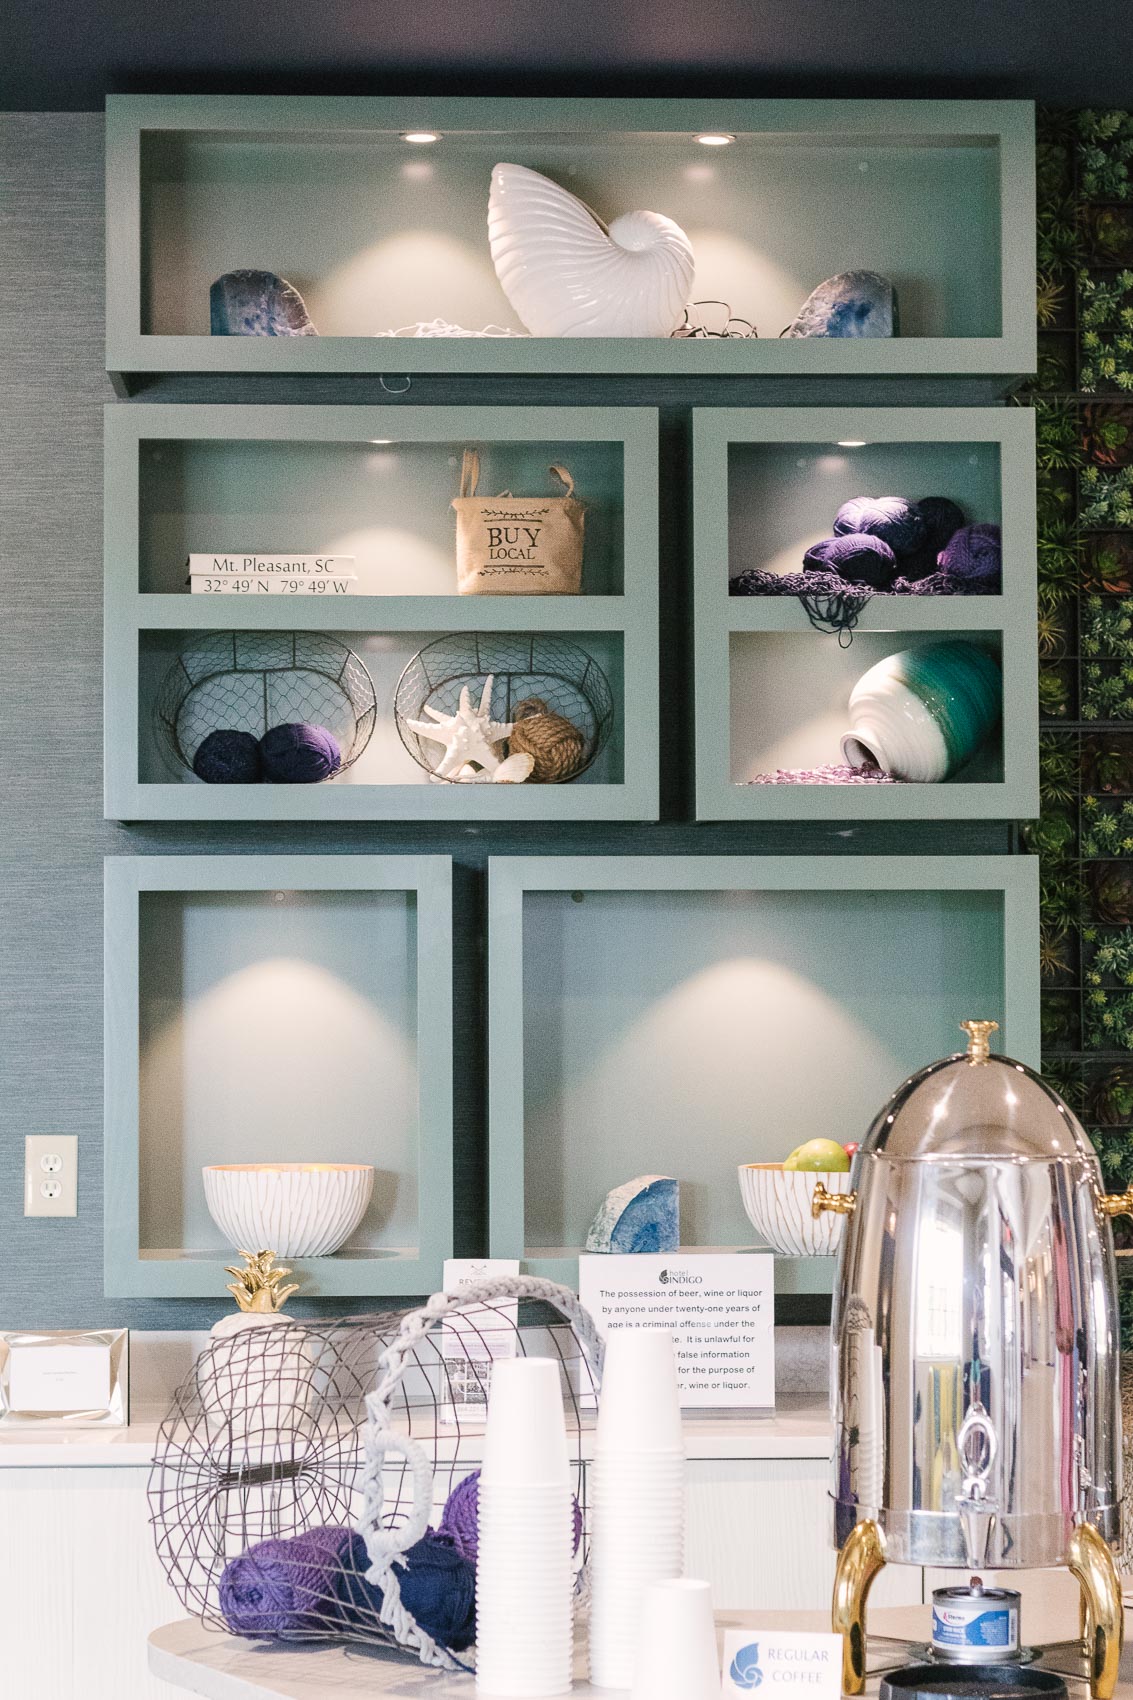 Where to stay in Mount Pleasant, SC: Hotel Indigo - a pet-friendly boutique hotel reflecting the elegant, hip, beachy atmosphere of this sunny oceanfront Charleston suburb. | Travel Blogger | Beachy Decor | Hotel Review